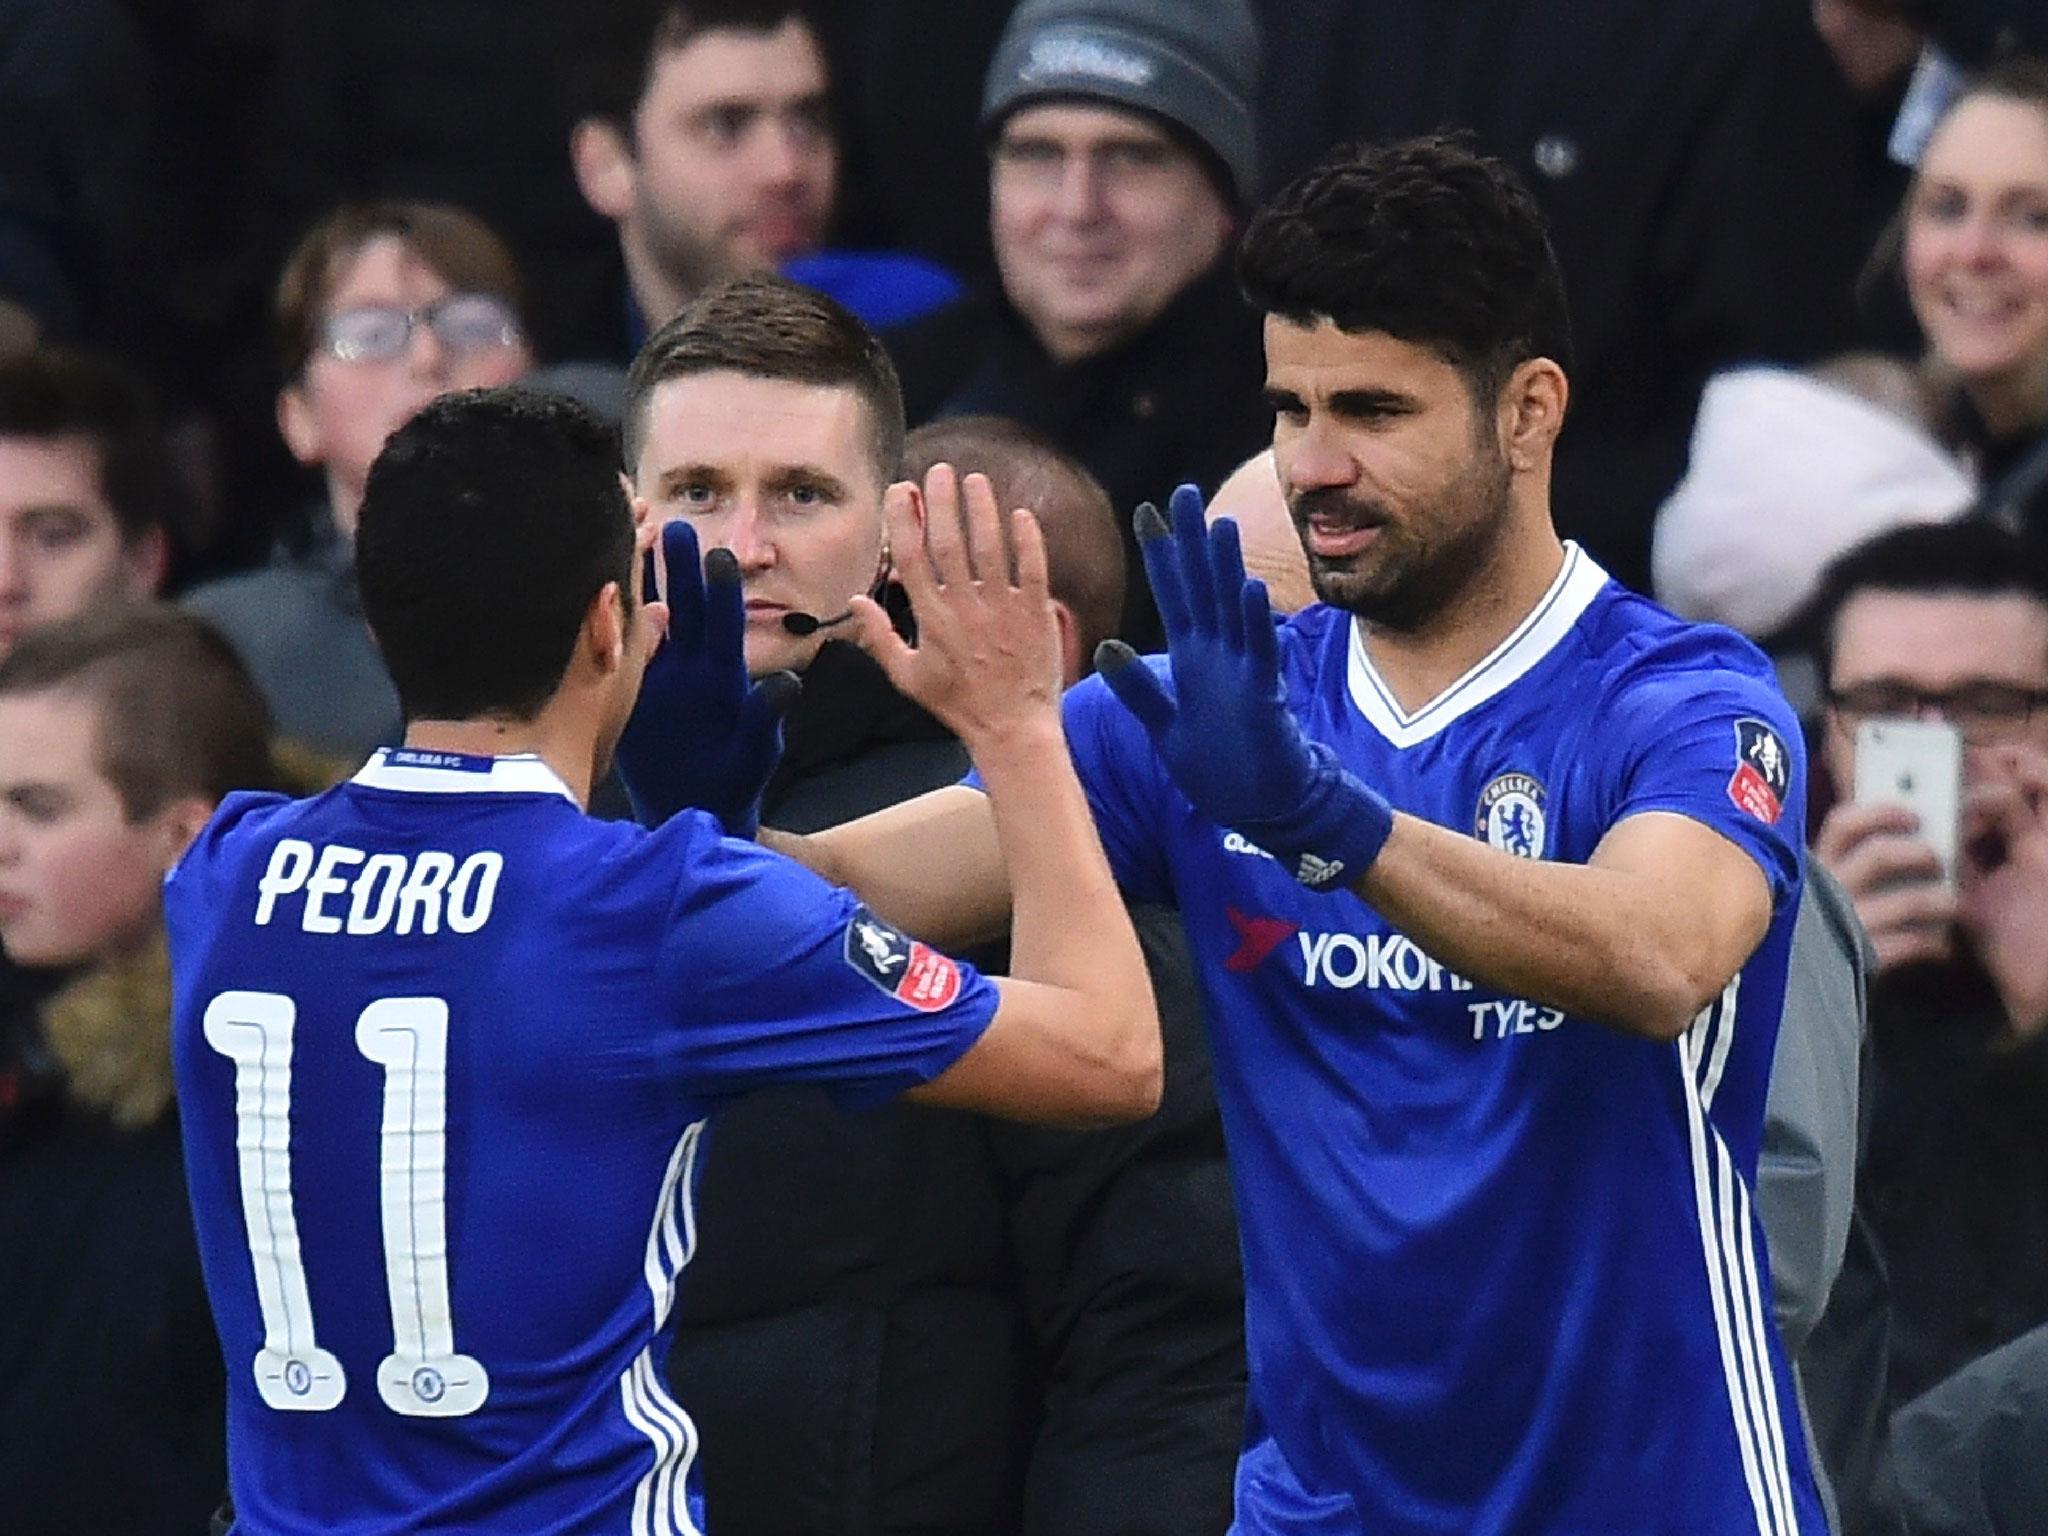 Diego Costa celebrates with Pedro after scoring a goal for Chelsea last season